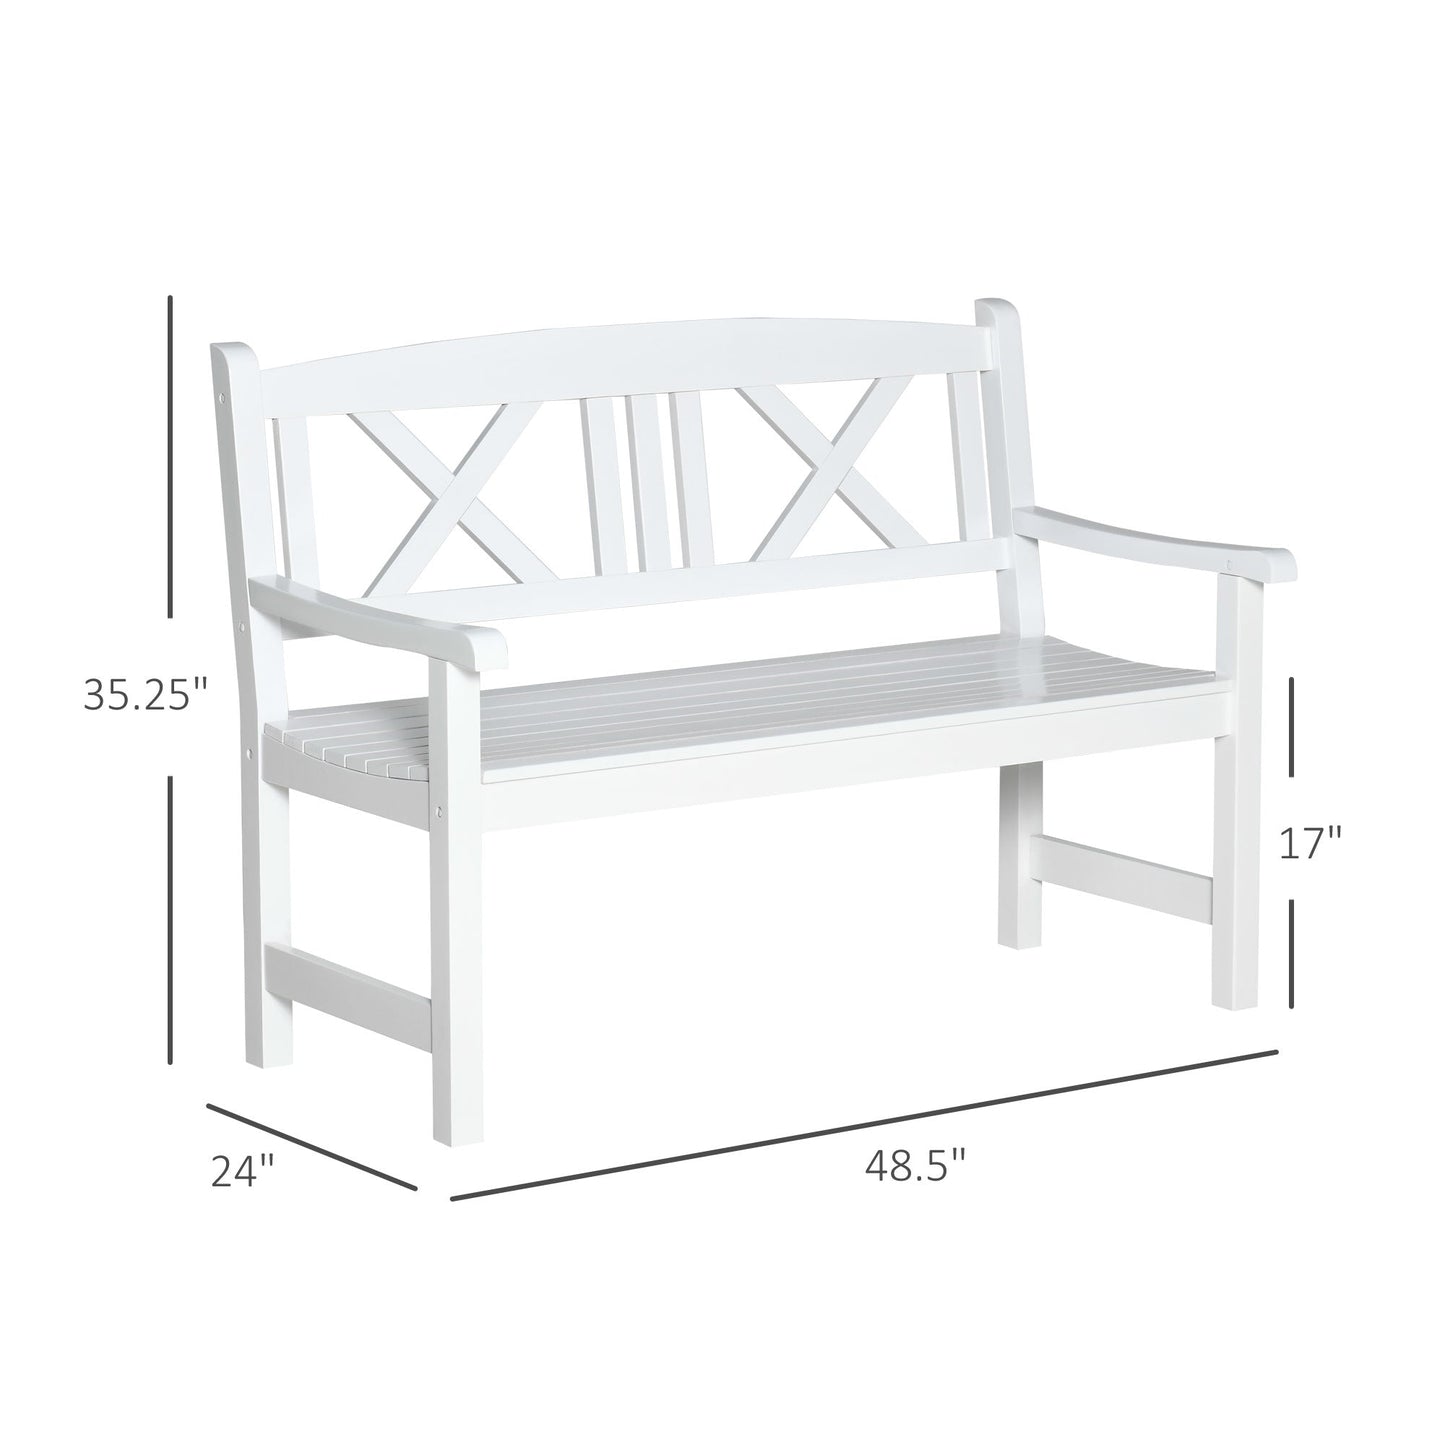 Outdoor and Garden-2-Seater Wooden Garden Bench, 4FT Outdoor Patio Loveseat with Unique X-Shape Back for Yard, Lawn, Porch, White - Outdoor Style Company